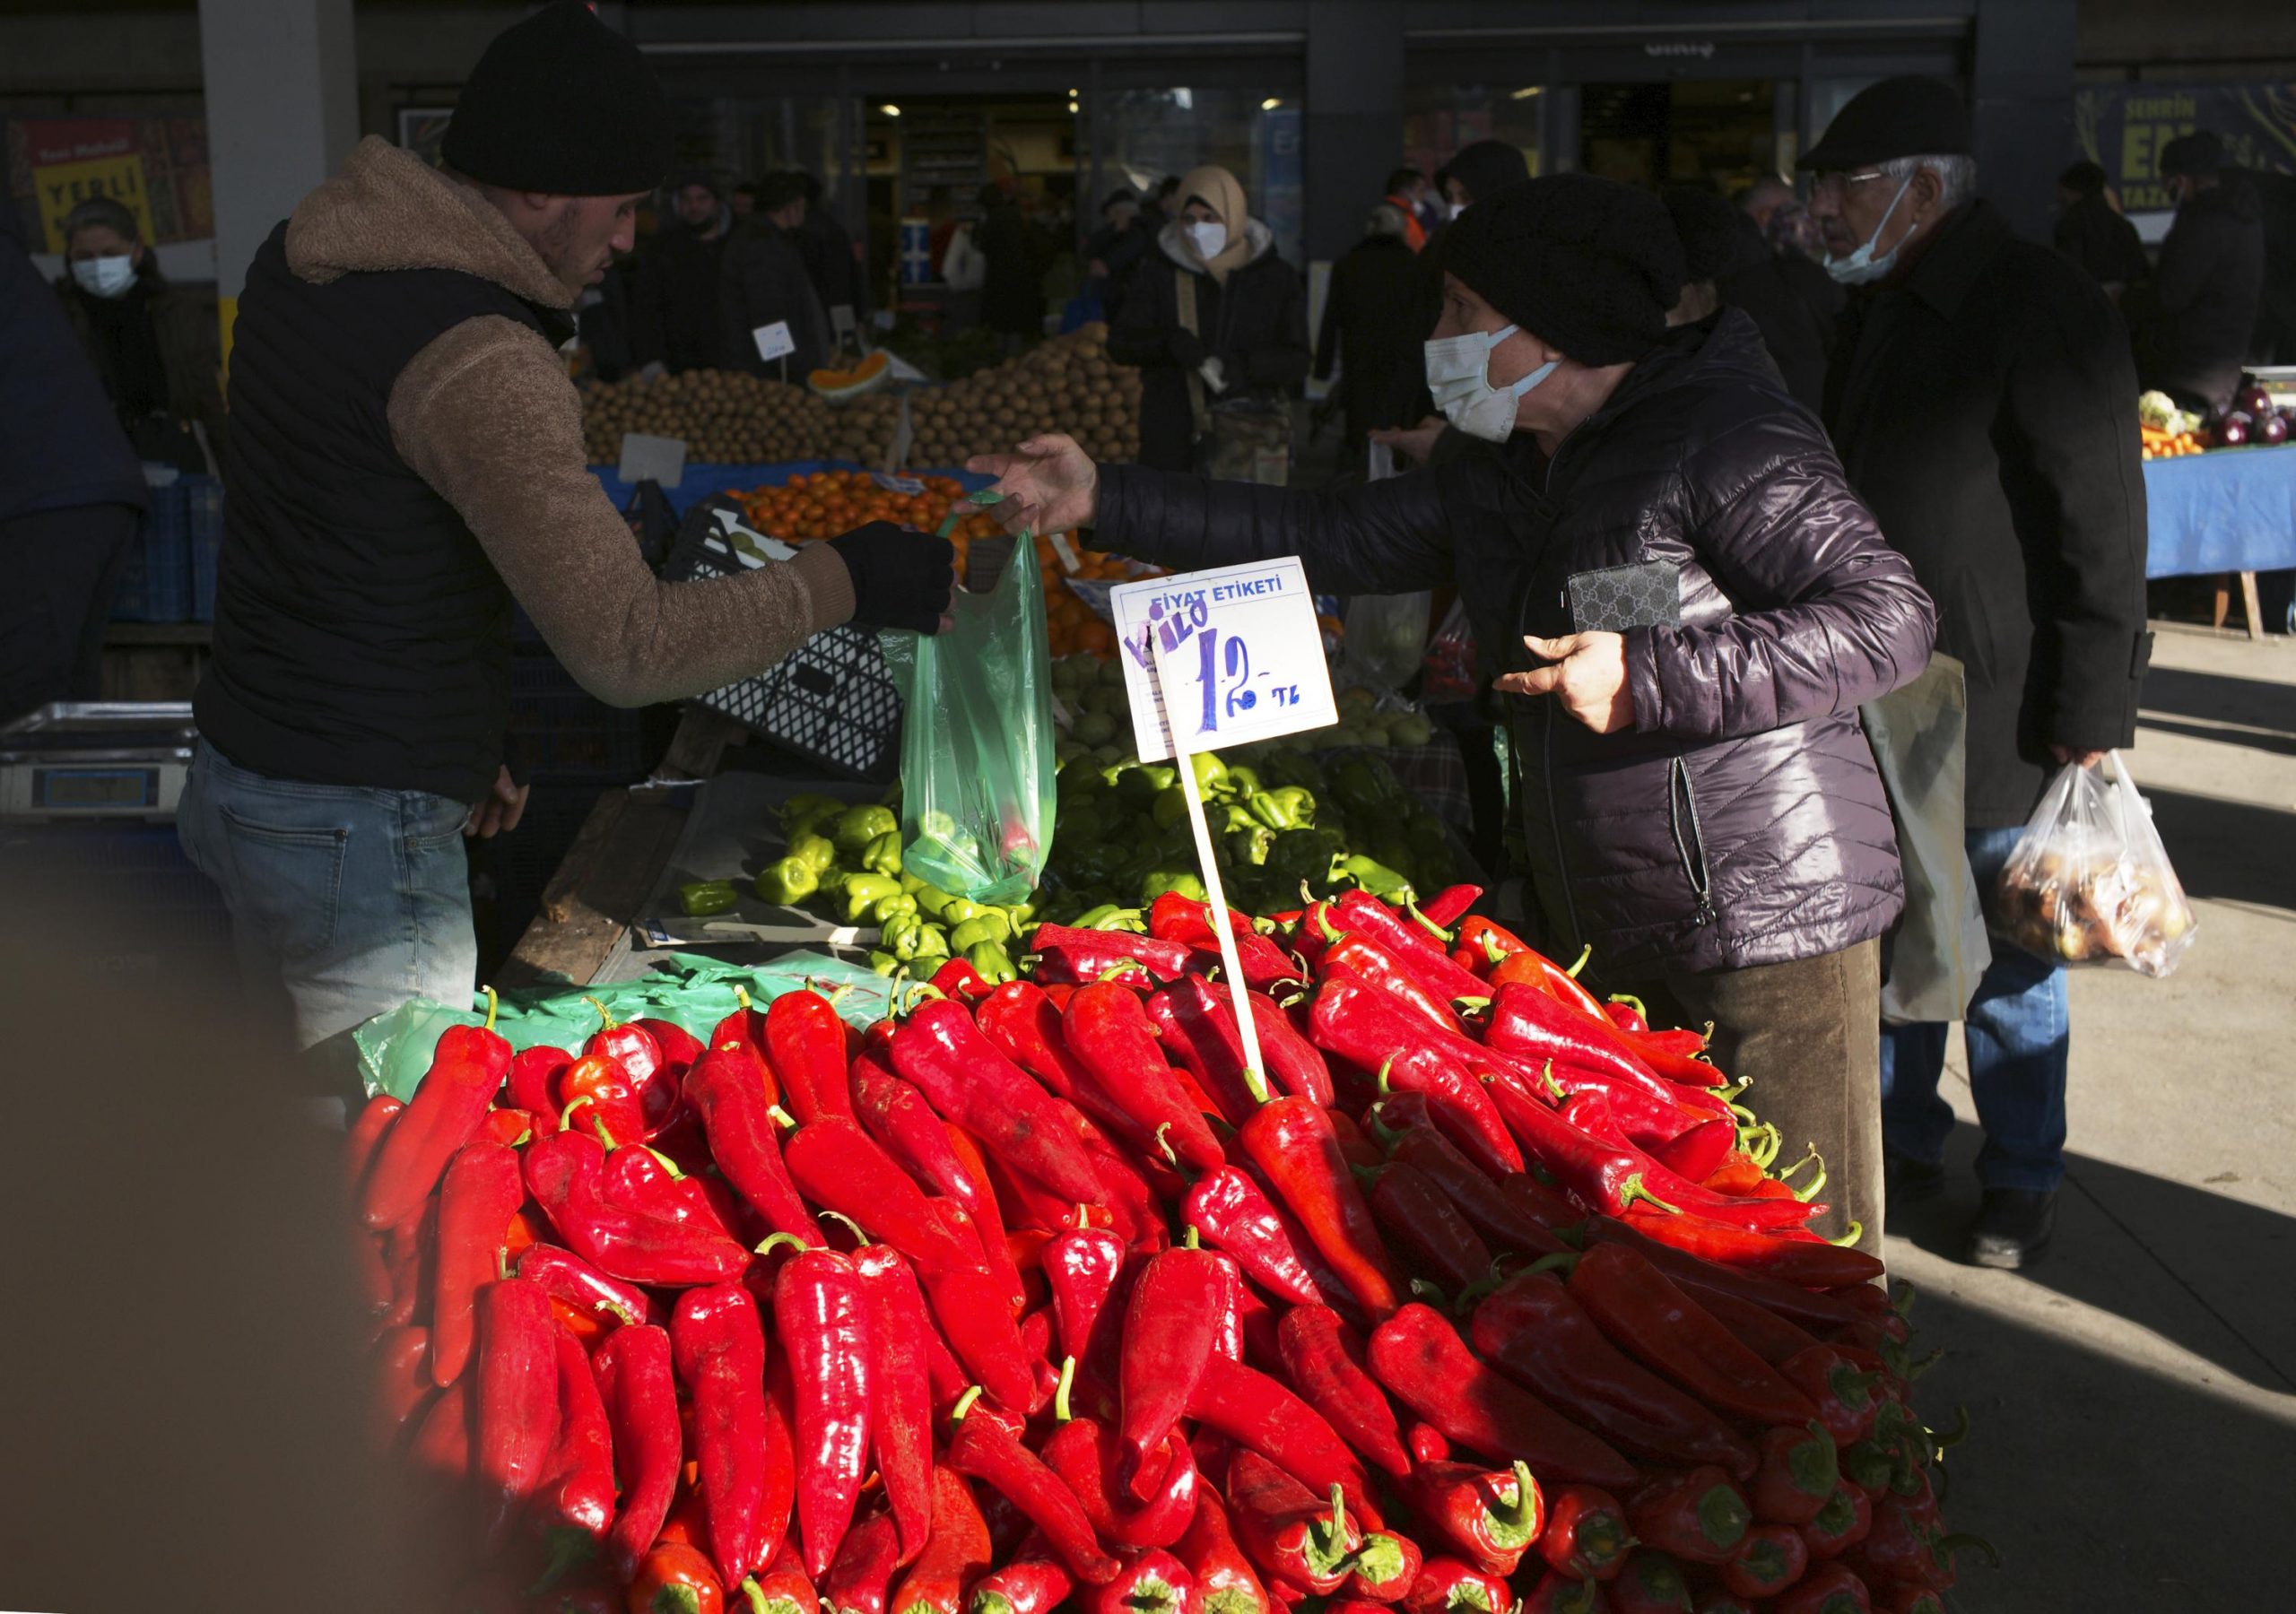 Turkey's inflation hits 54%, deepening cost-of-living woes 1